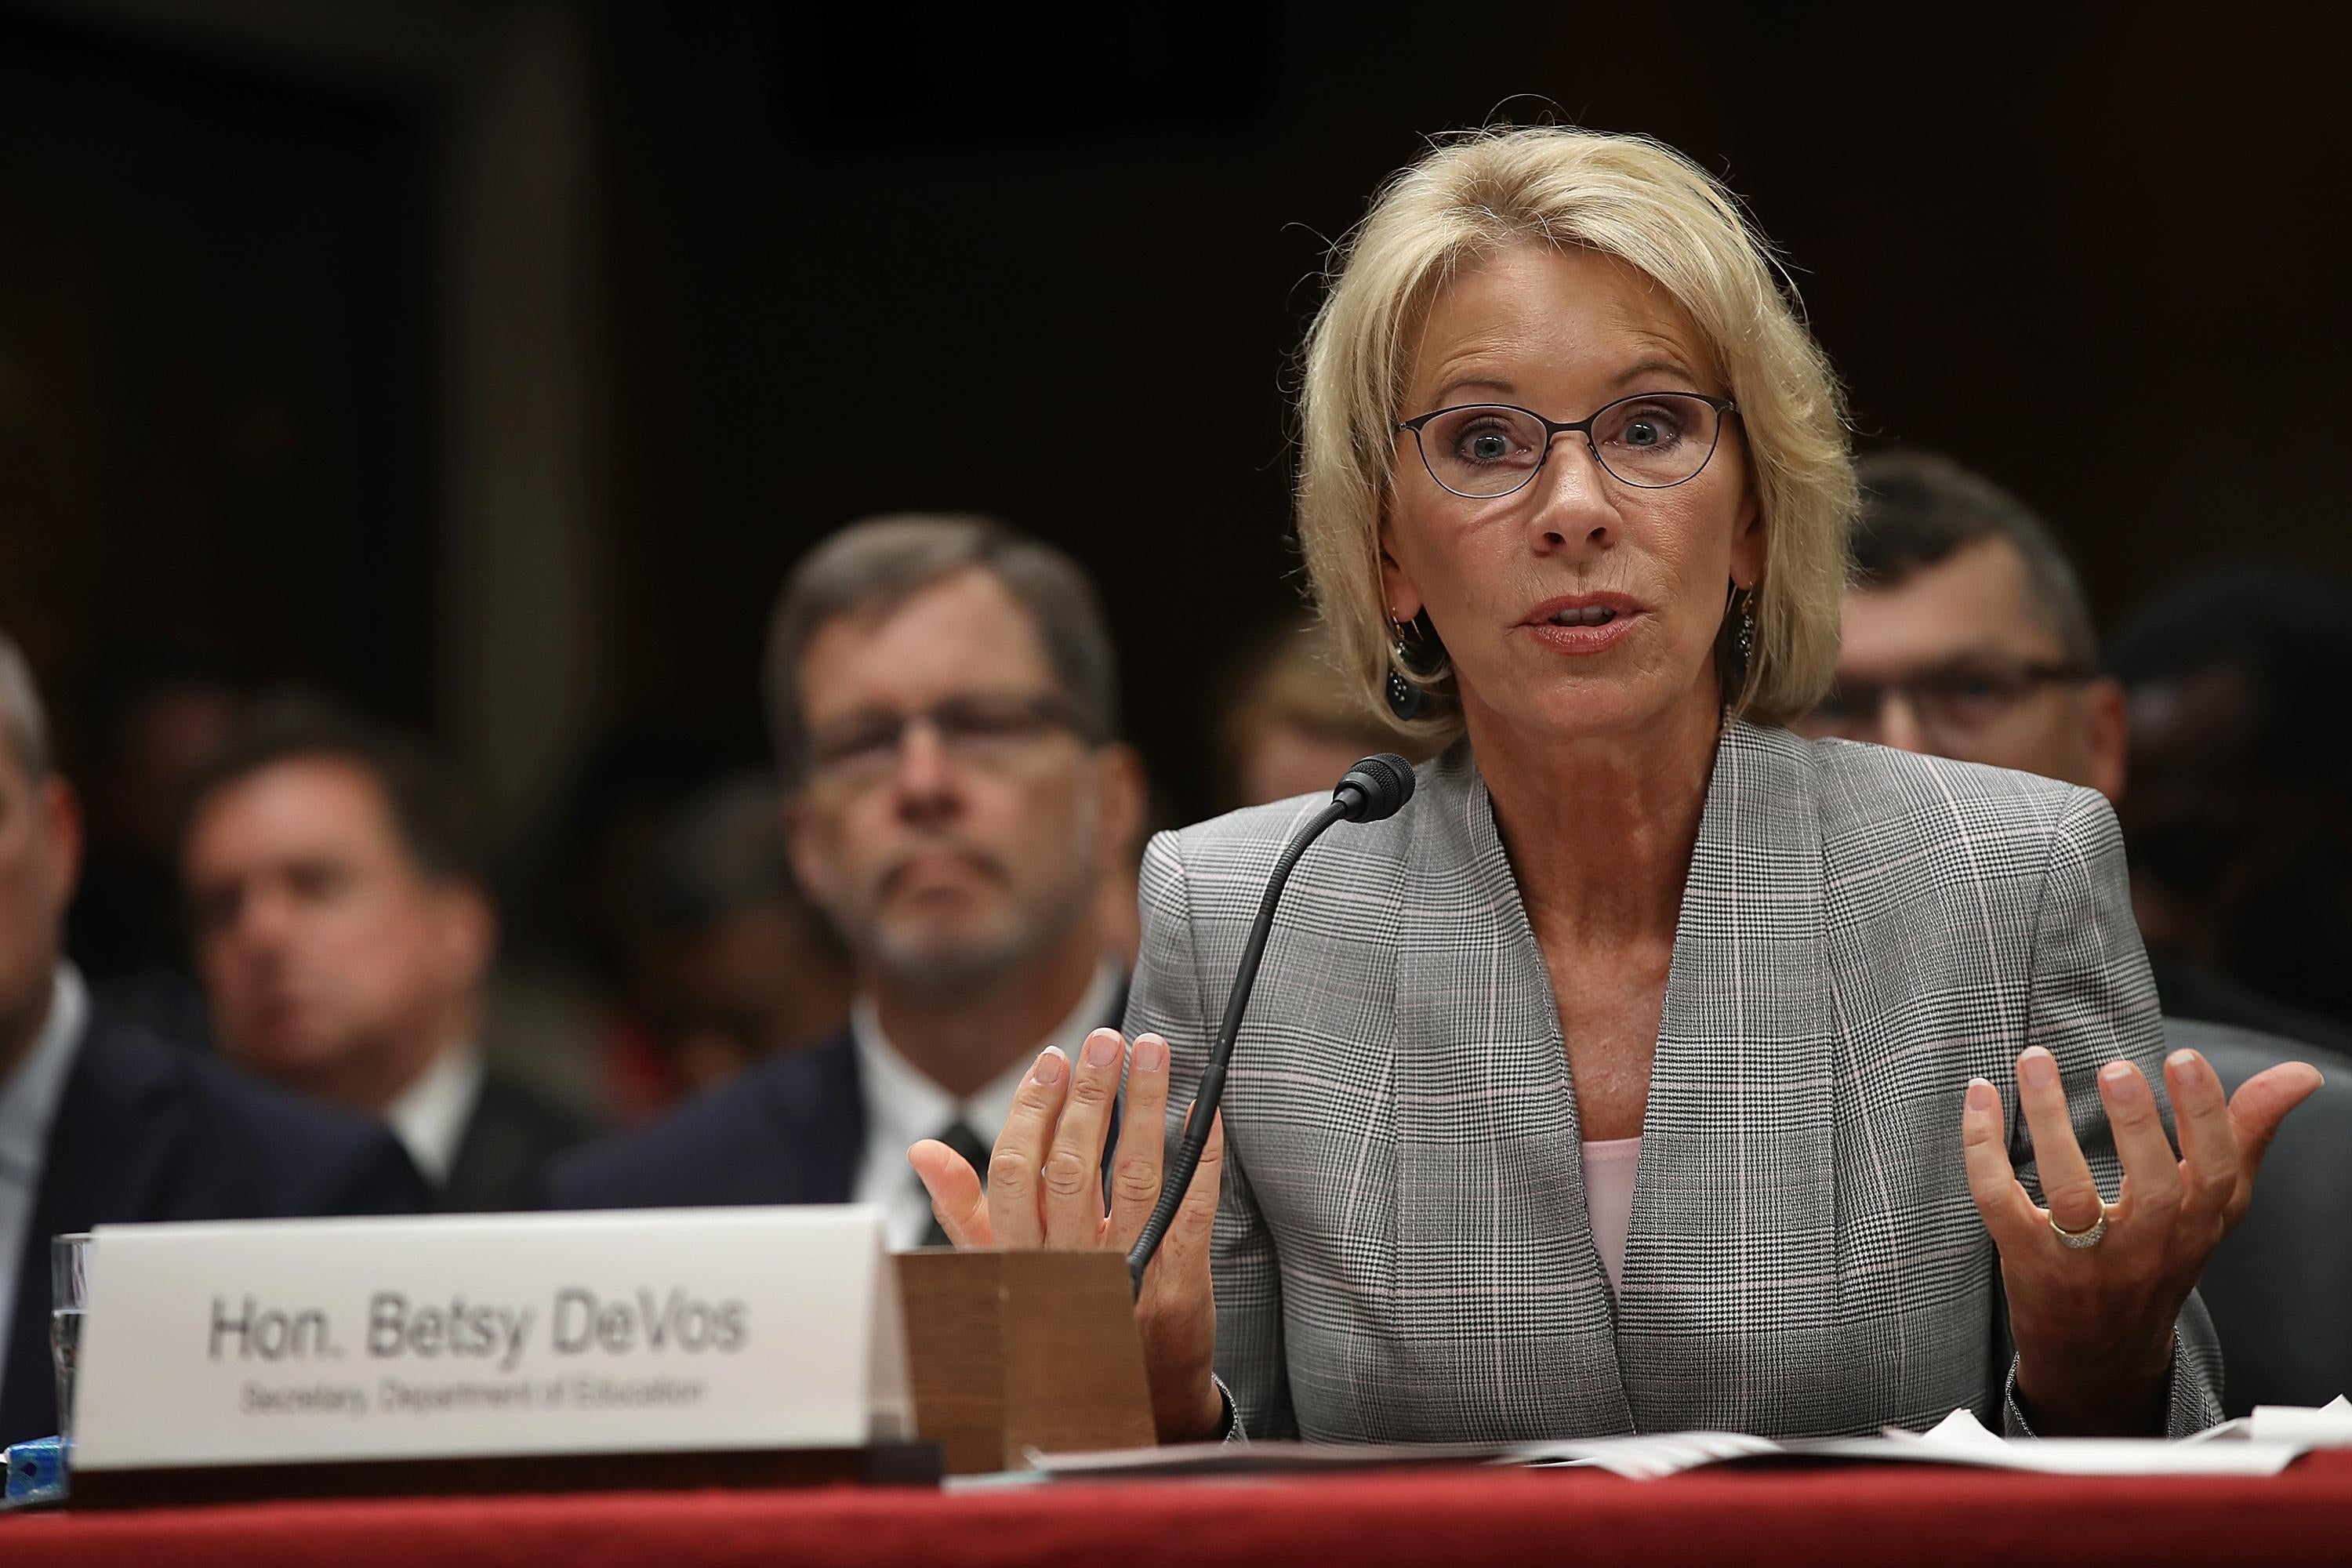 WASHINGTON, DC - JUNE 06:  Education Secretary Betsy DeVos testifies before the Senate Appropriations Committee on Capitol Hill June 6, 2017 in Washington, DC. DeVos testified on the fiscal year 2018 budget request for the Education Department.
 (Photo by Win McNamee/Getty Images)